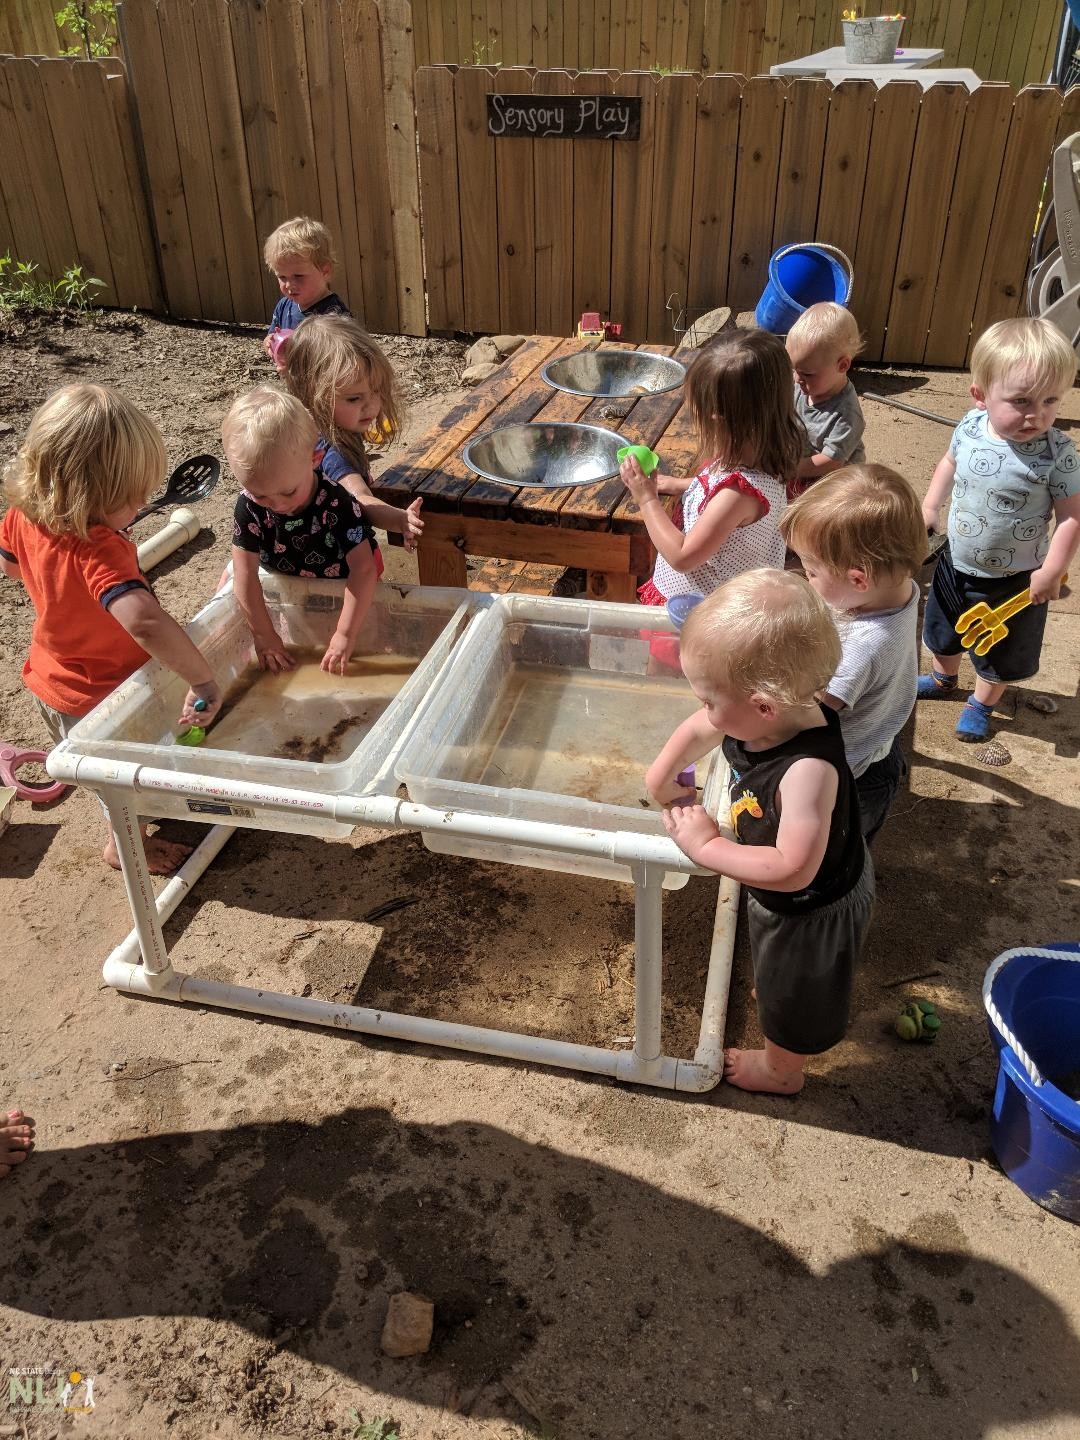 children engaging in water and mud play